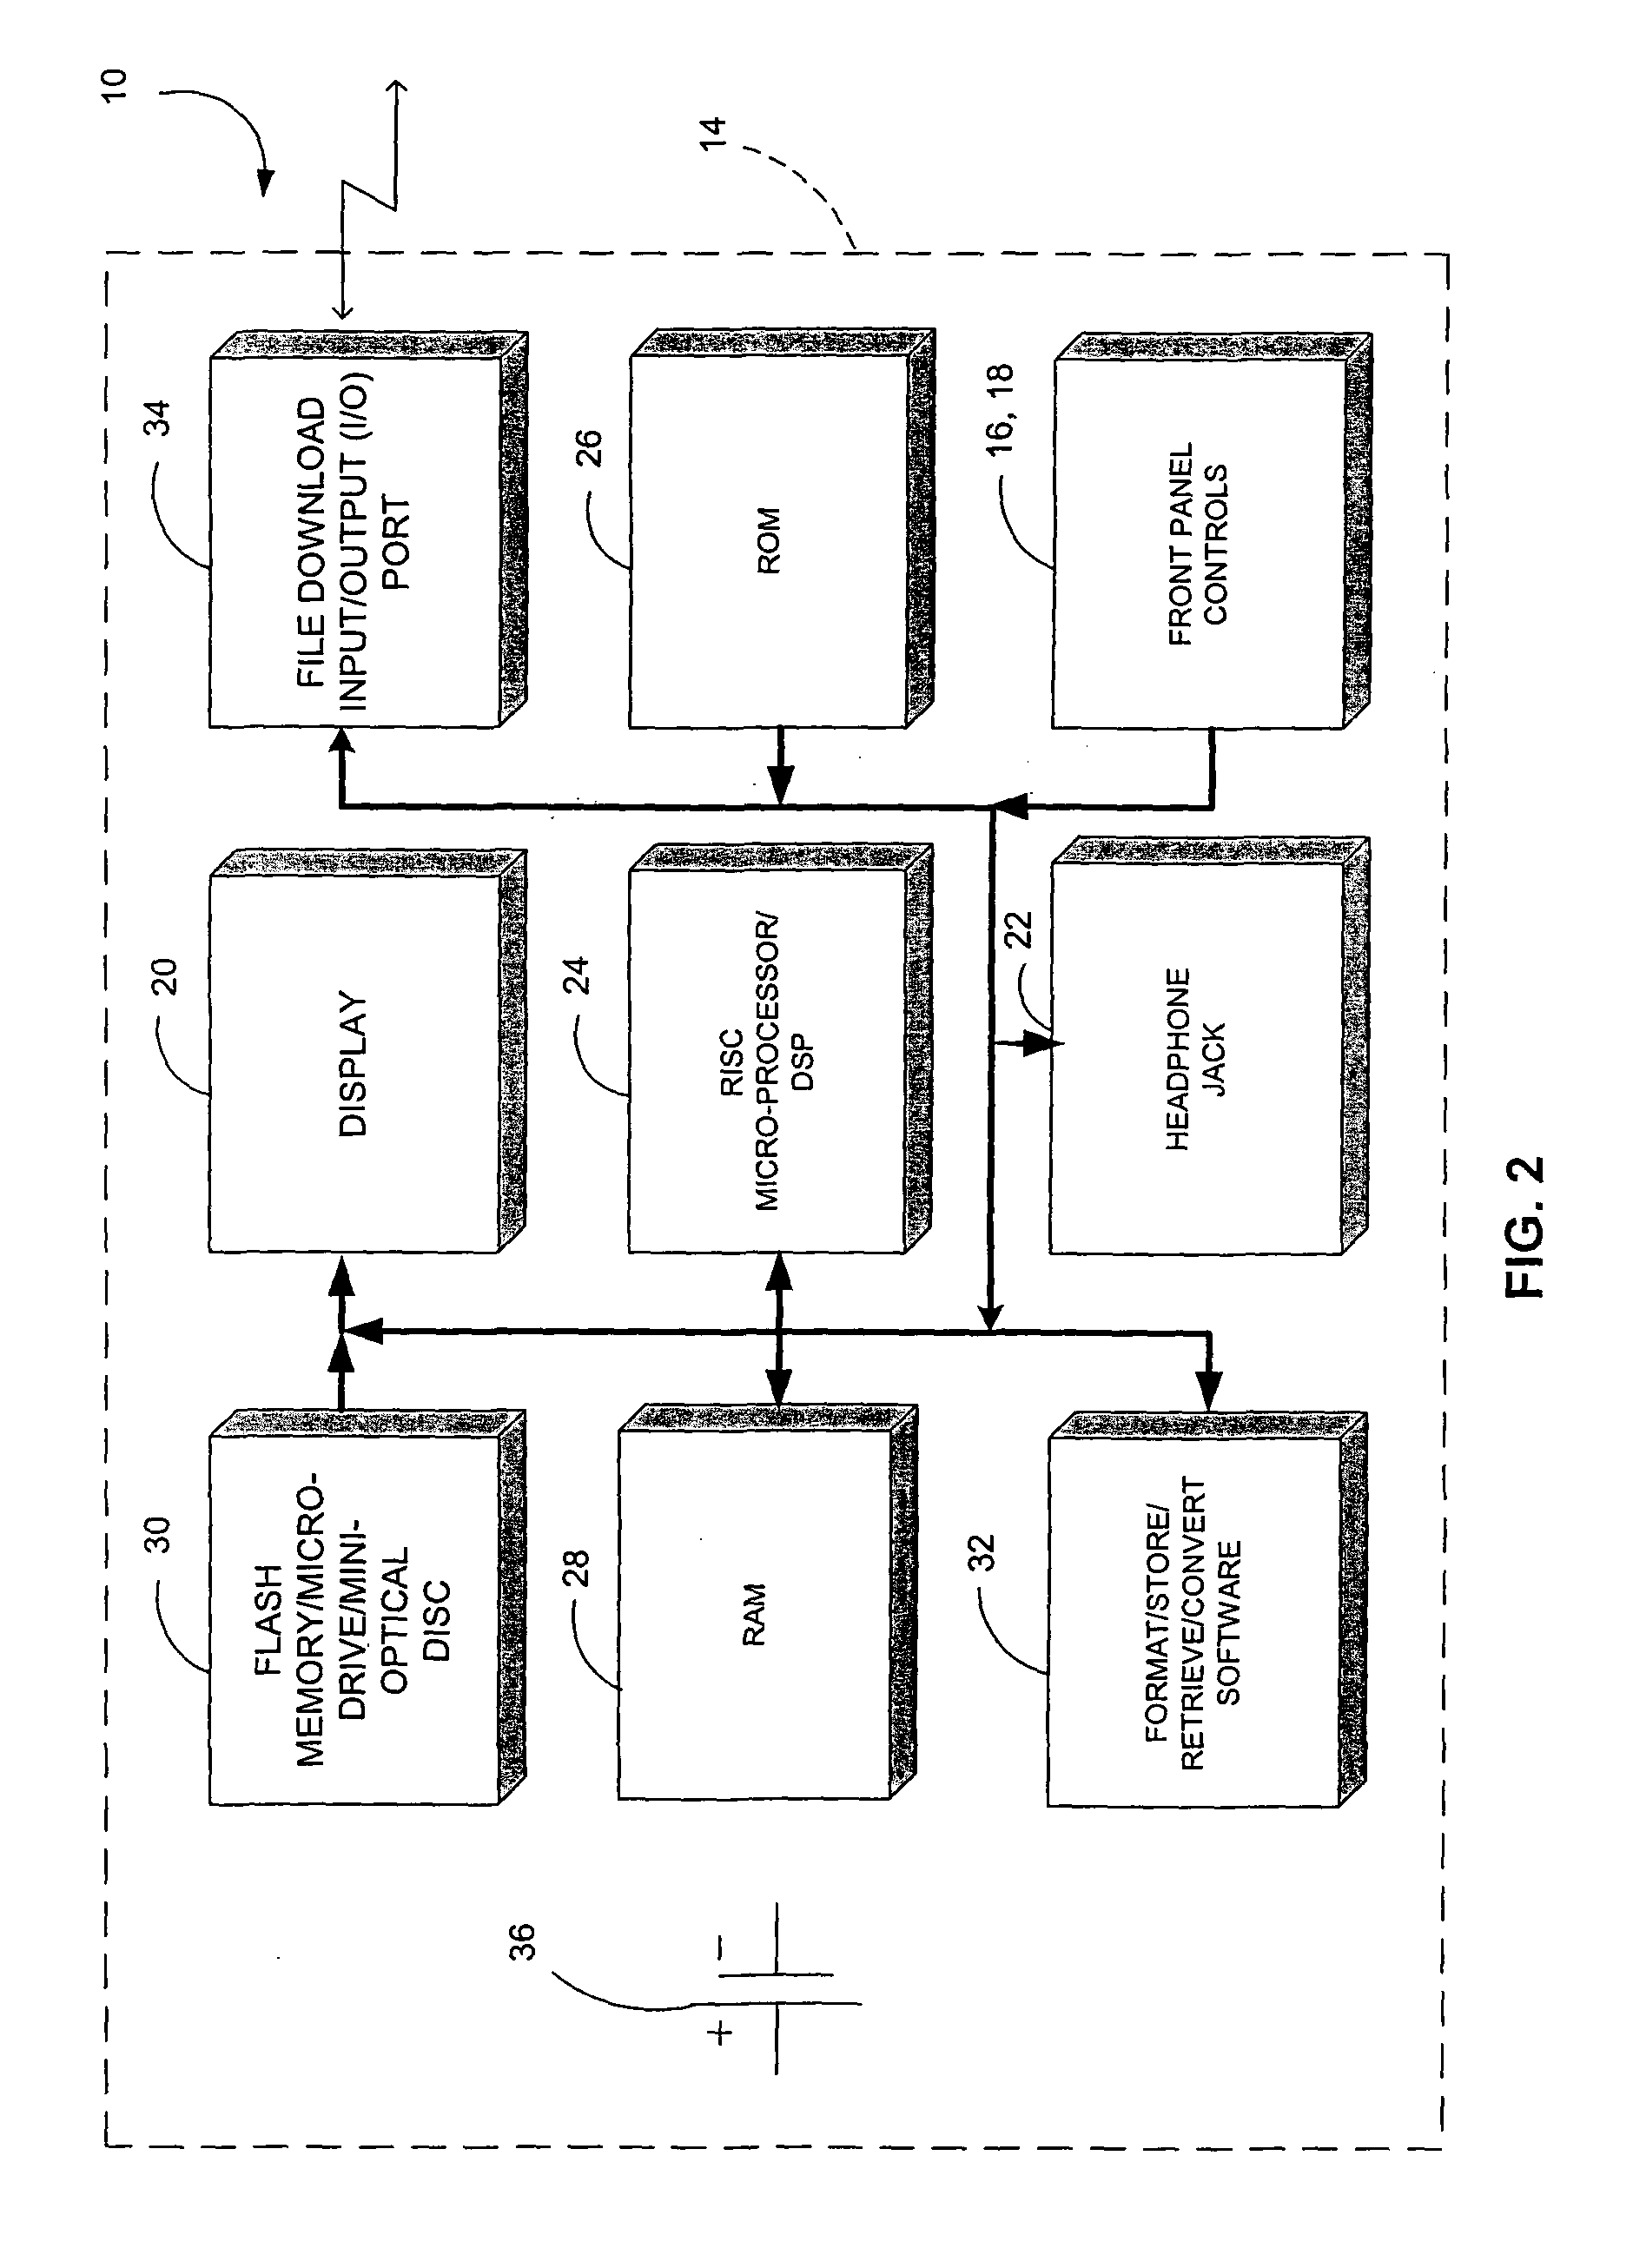 Portable hand-held music synthesizer and networking method and apparatus